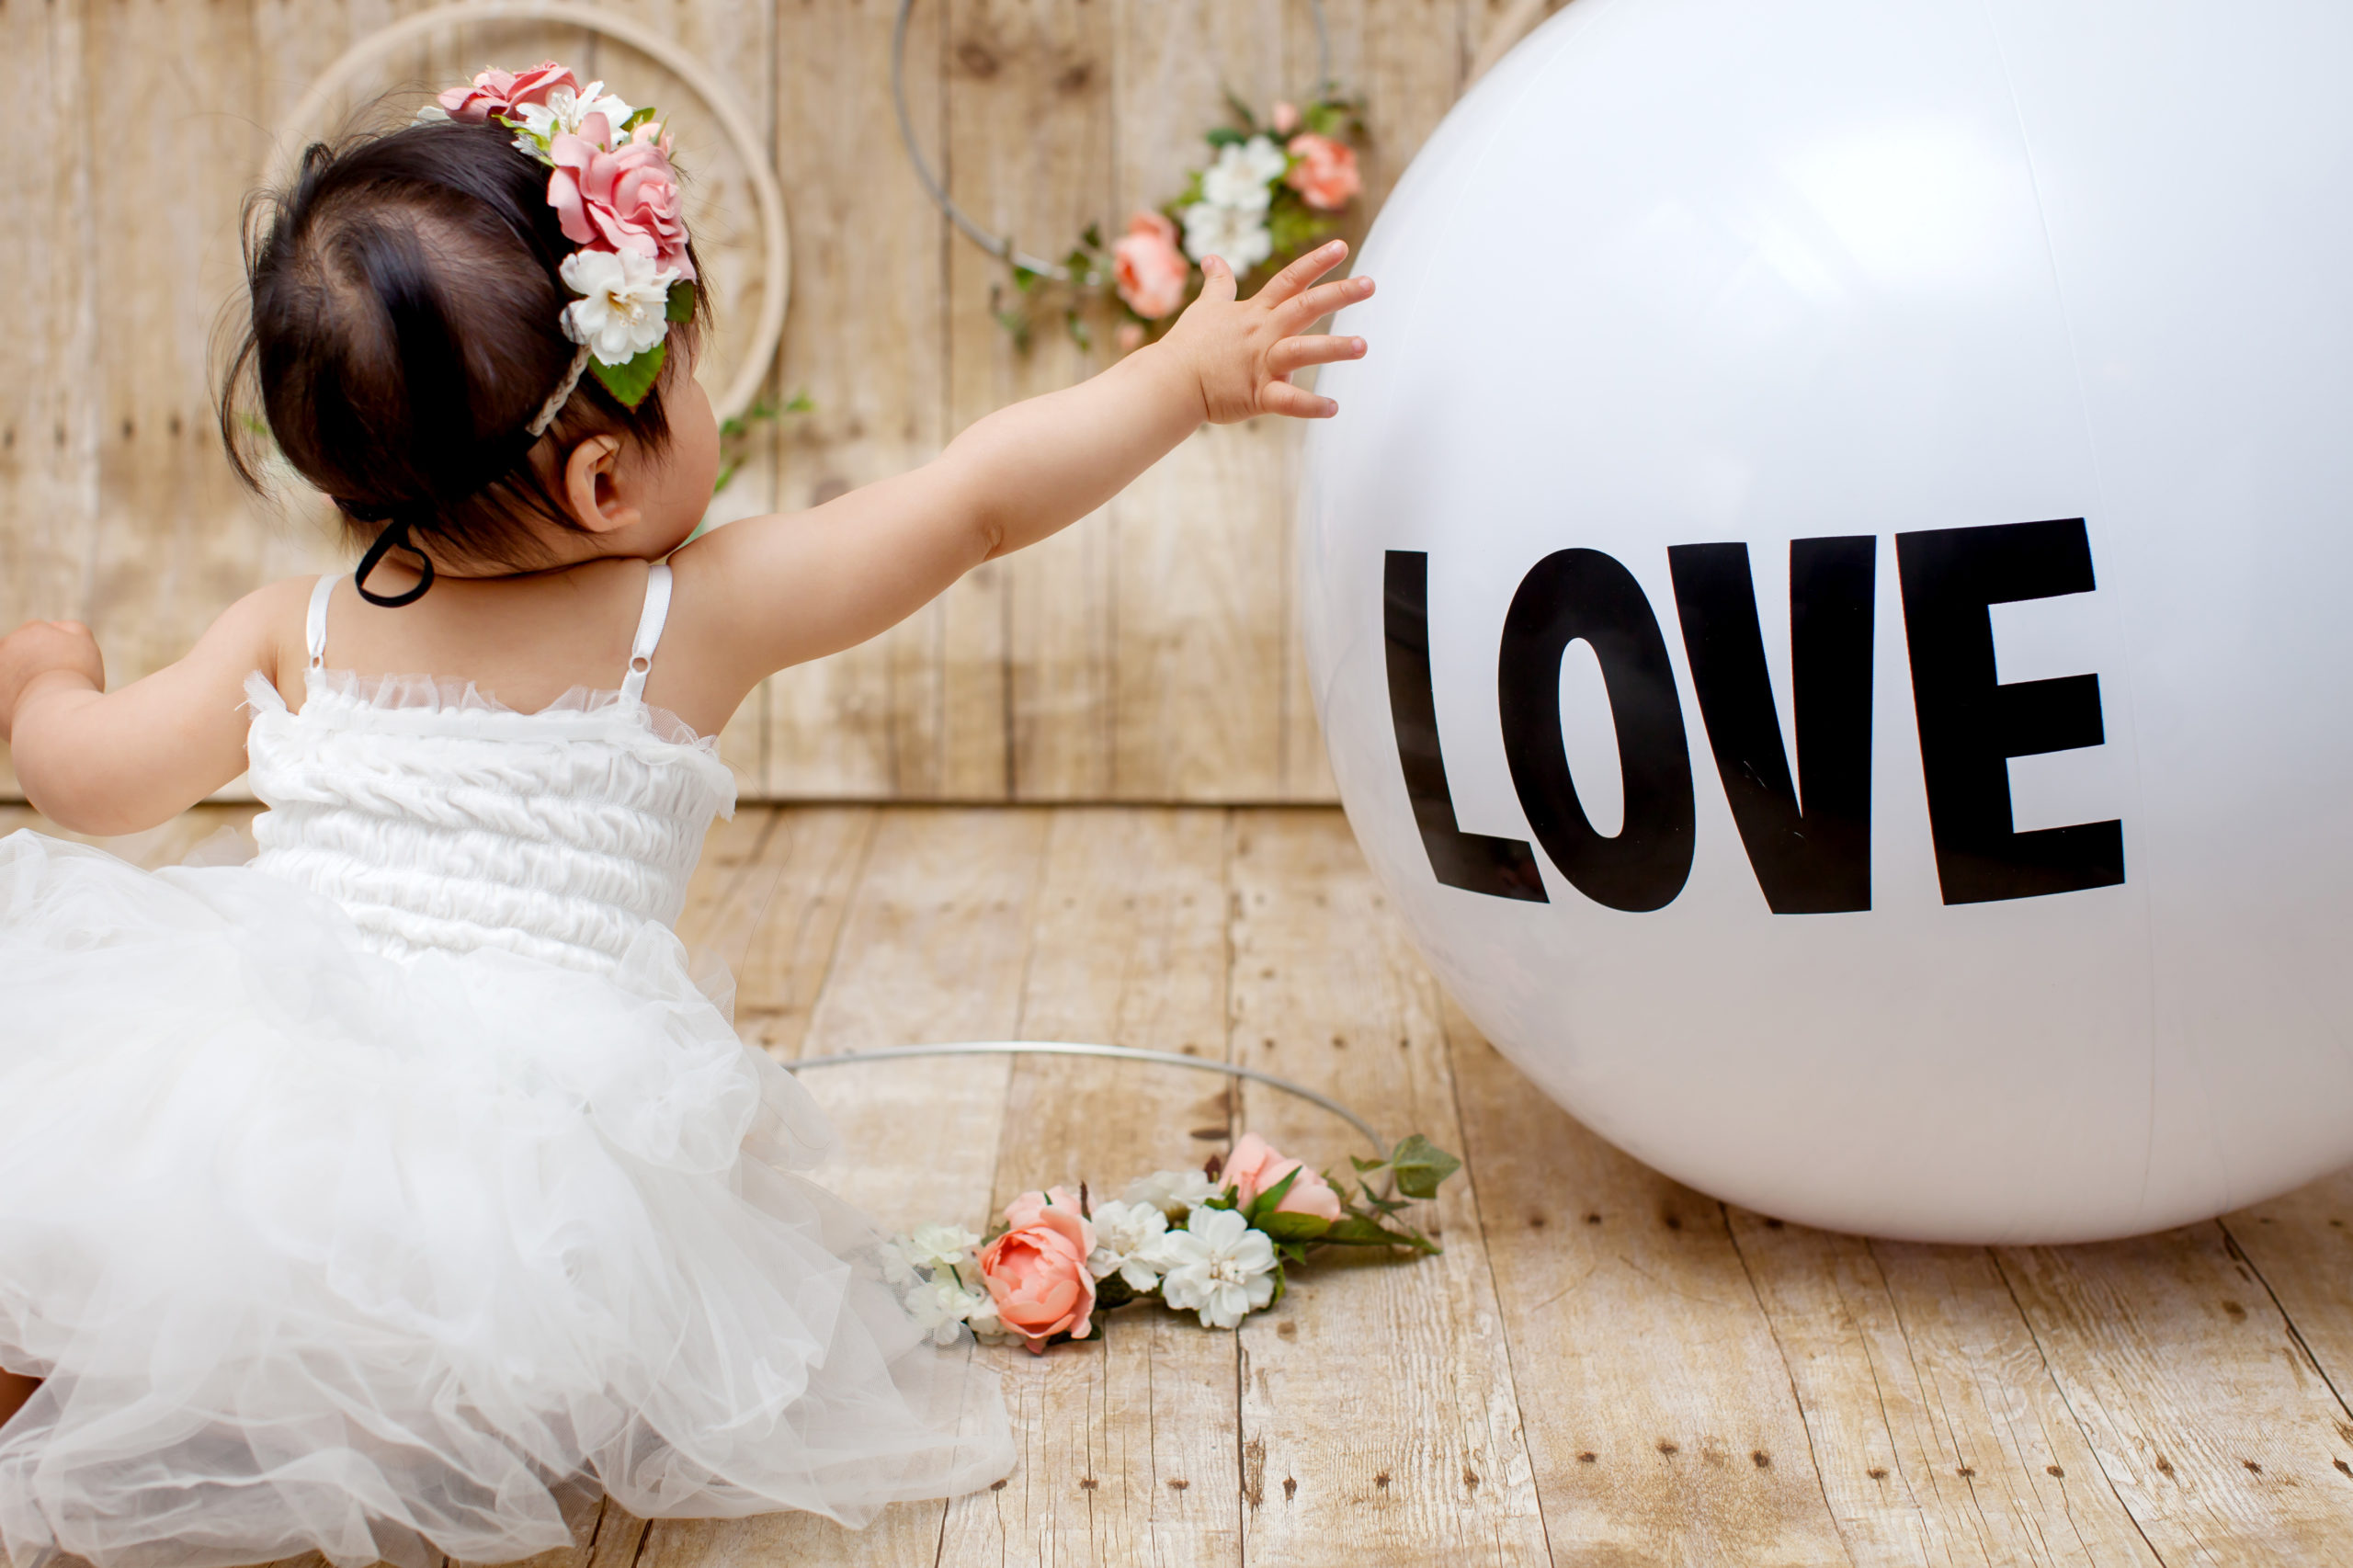 Studio family portrait photography with Love balloon prop